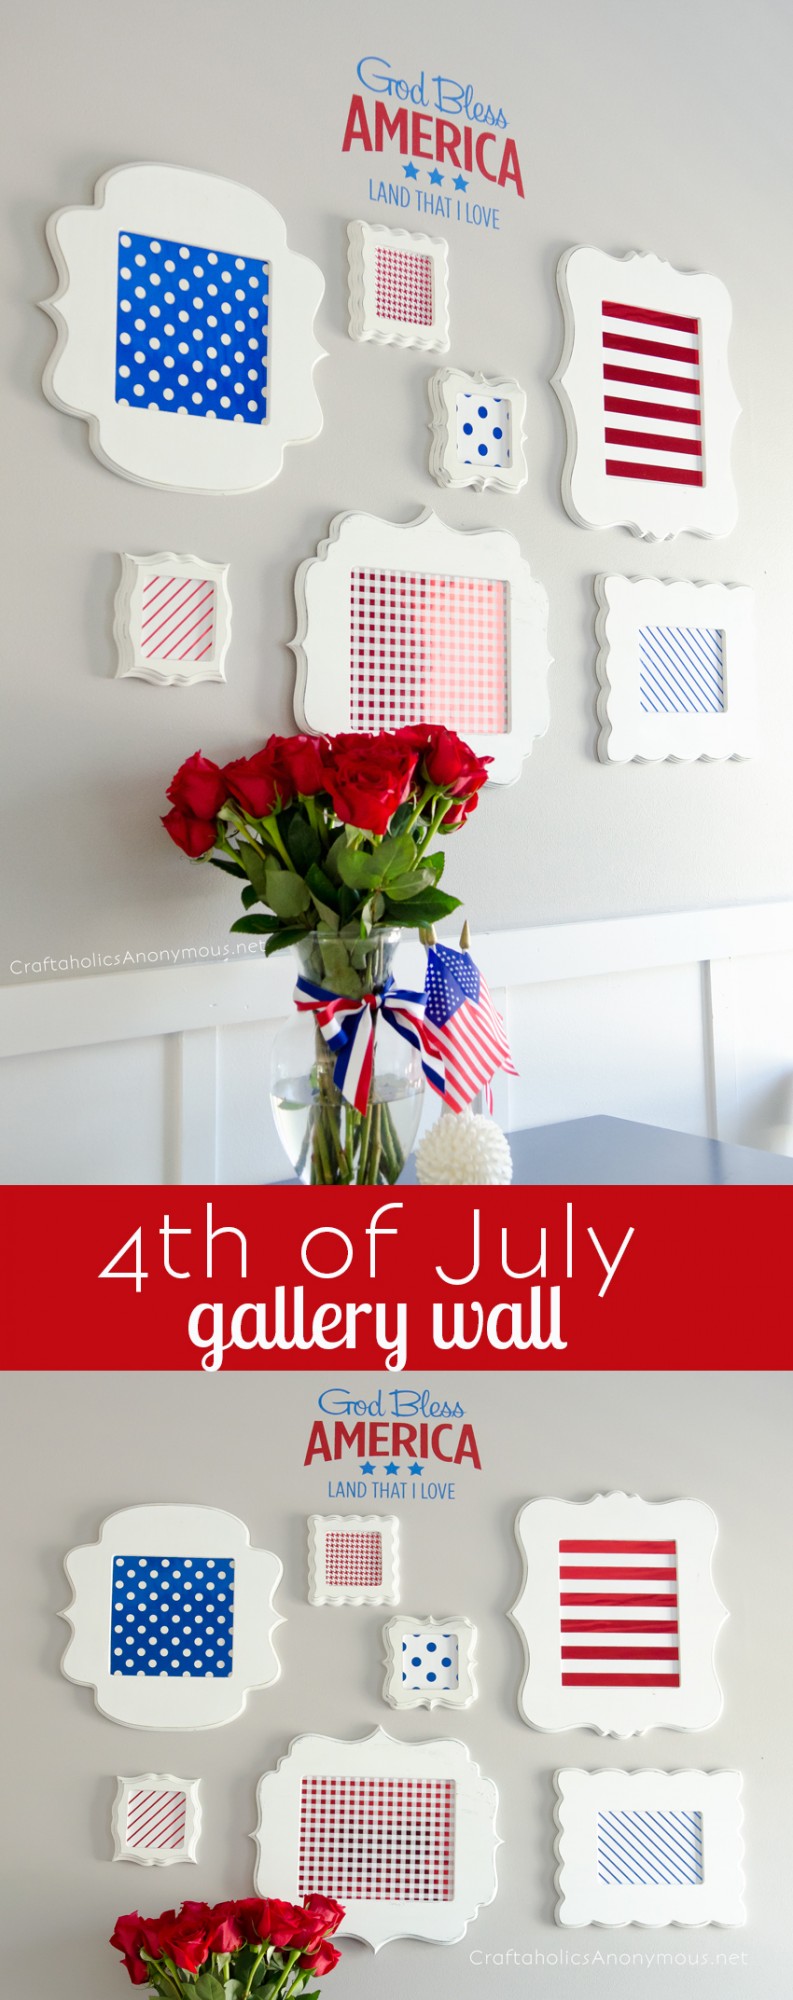 4th-of-July-gallery-wall-collage